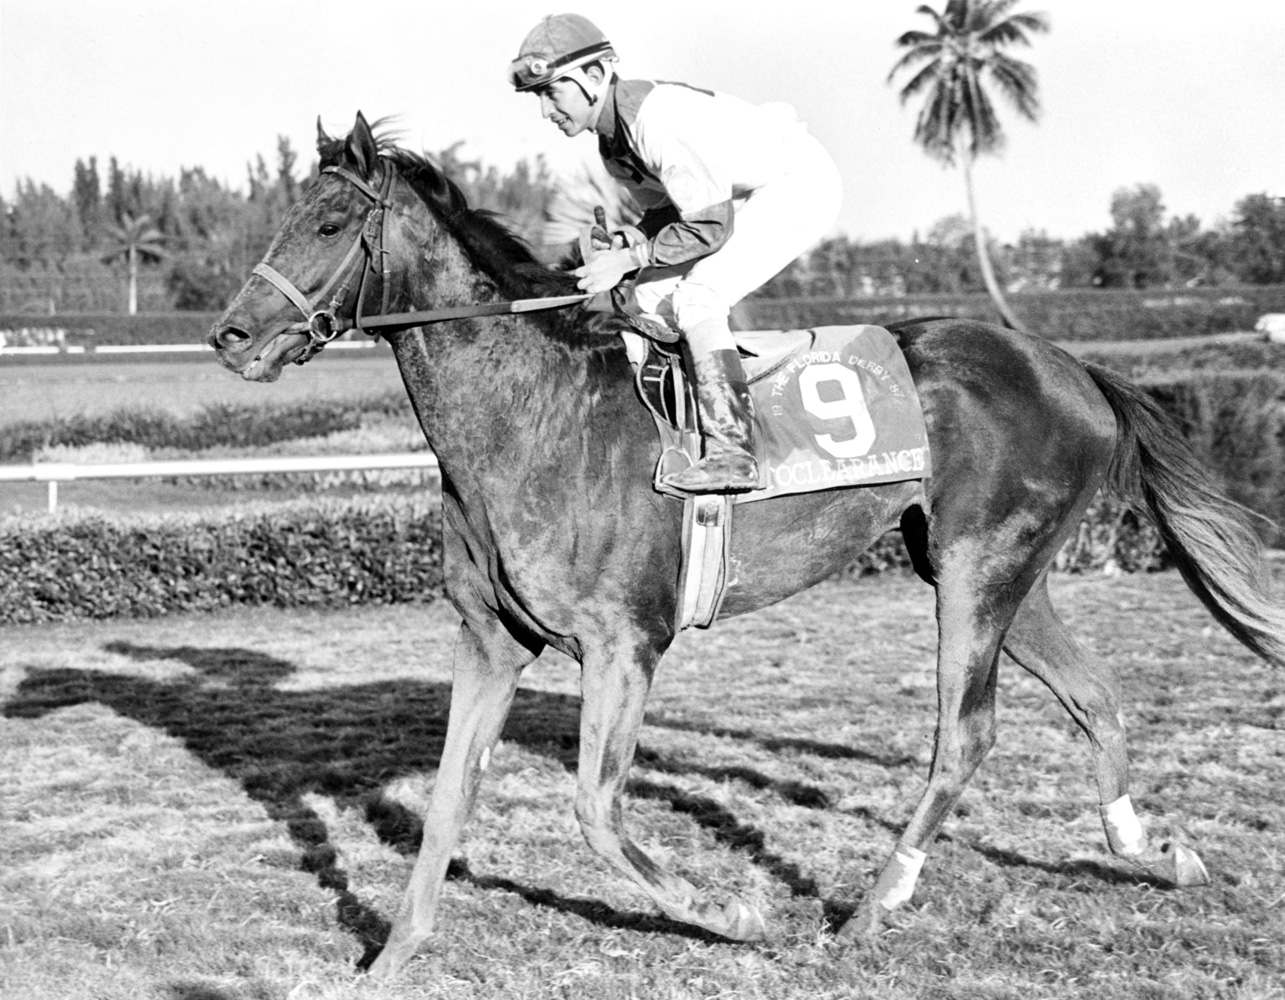 Jose Santos and Cryptoclearance after winning the 1987 Florida Derby at Gulfstream Park (Jim Raftery Turfotos)